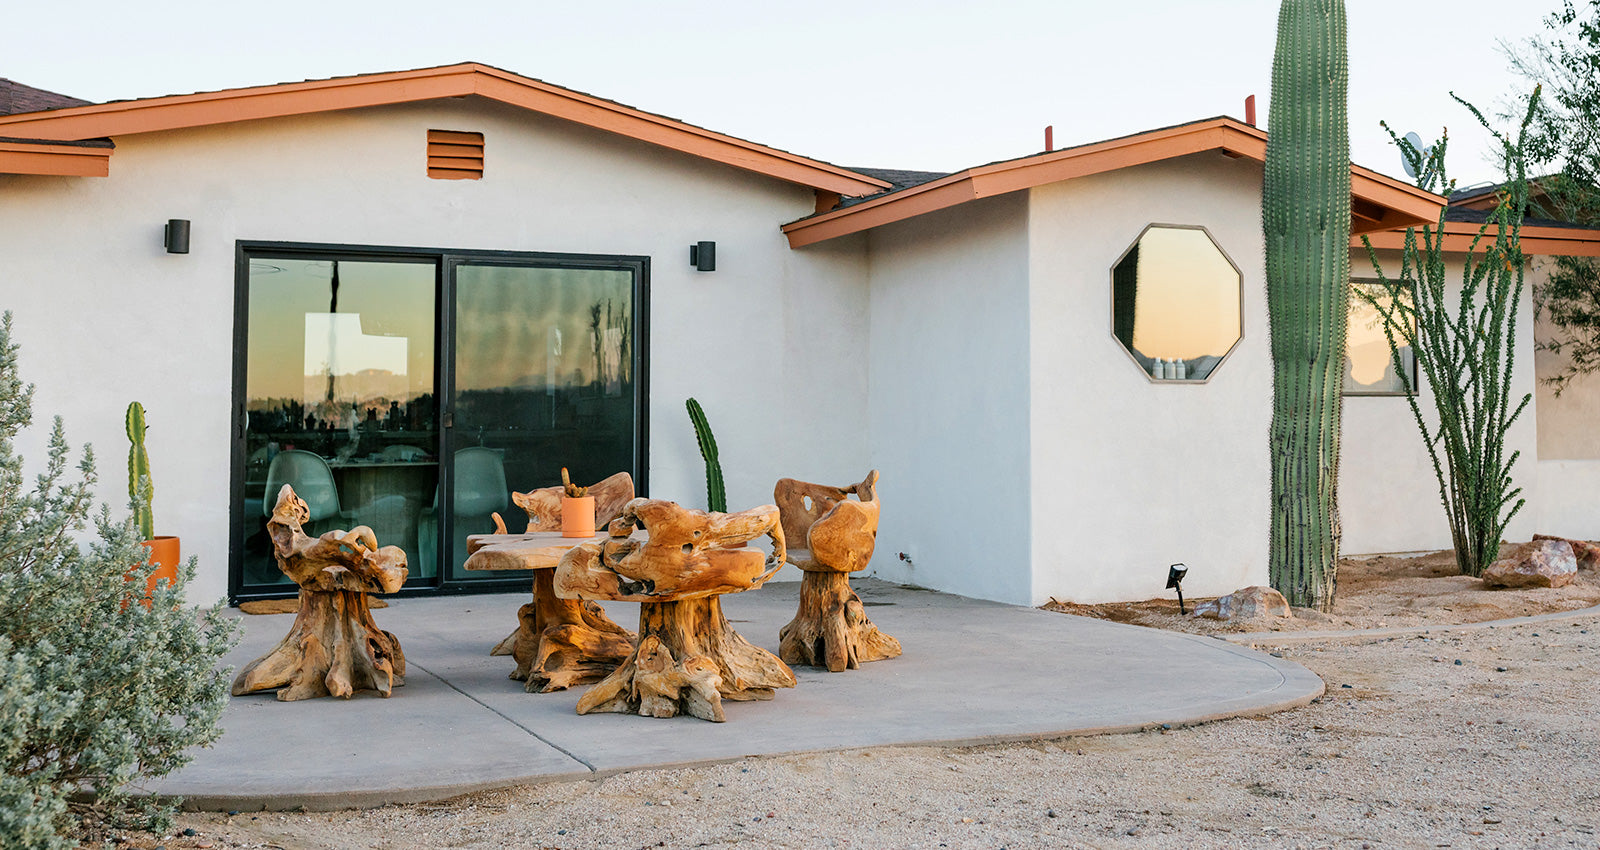 Welcome to Terracasa: An Inside Look at Dayna’s Desert Oasis